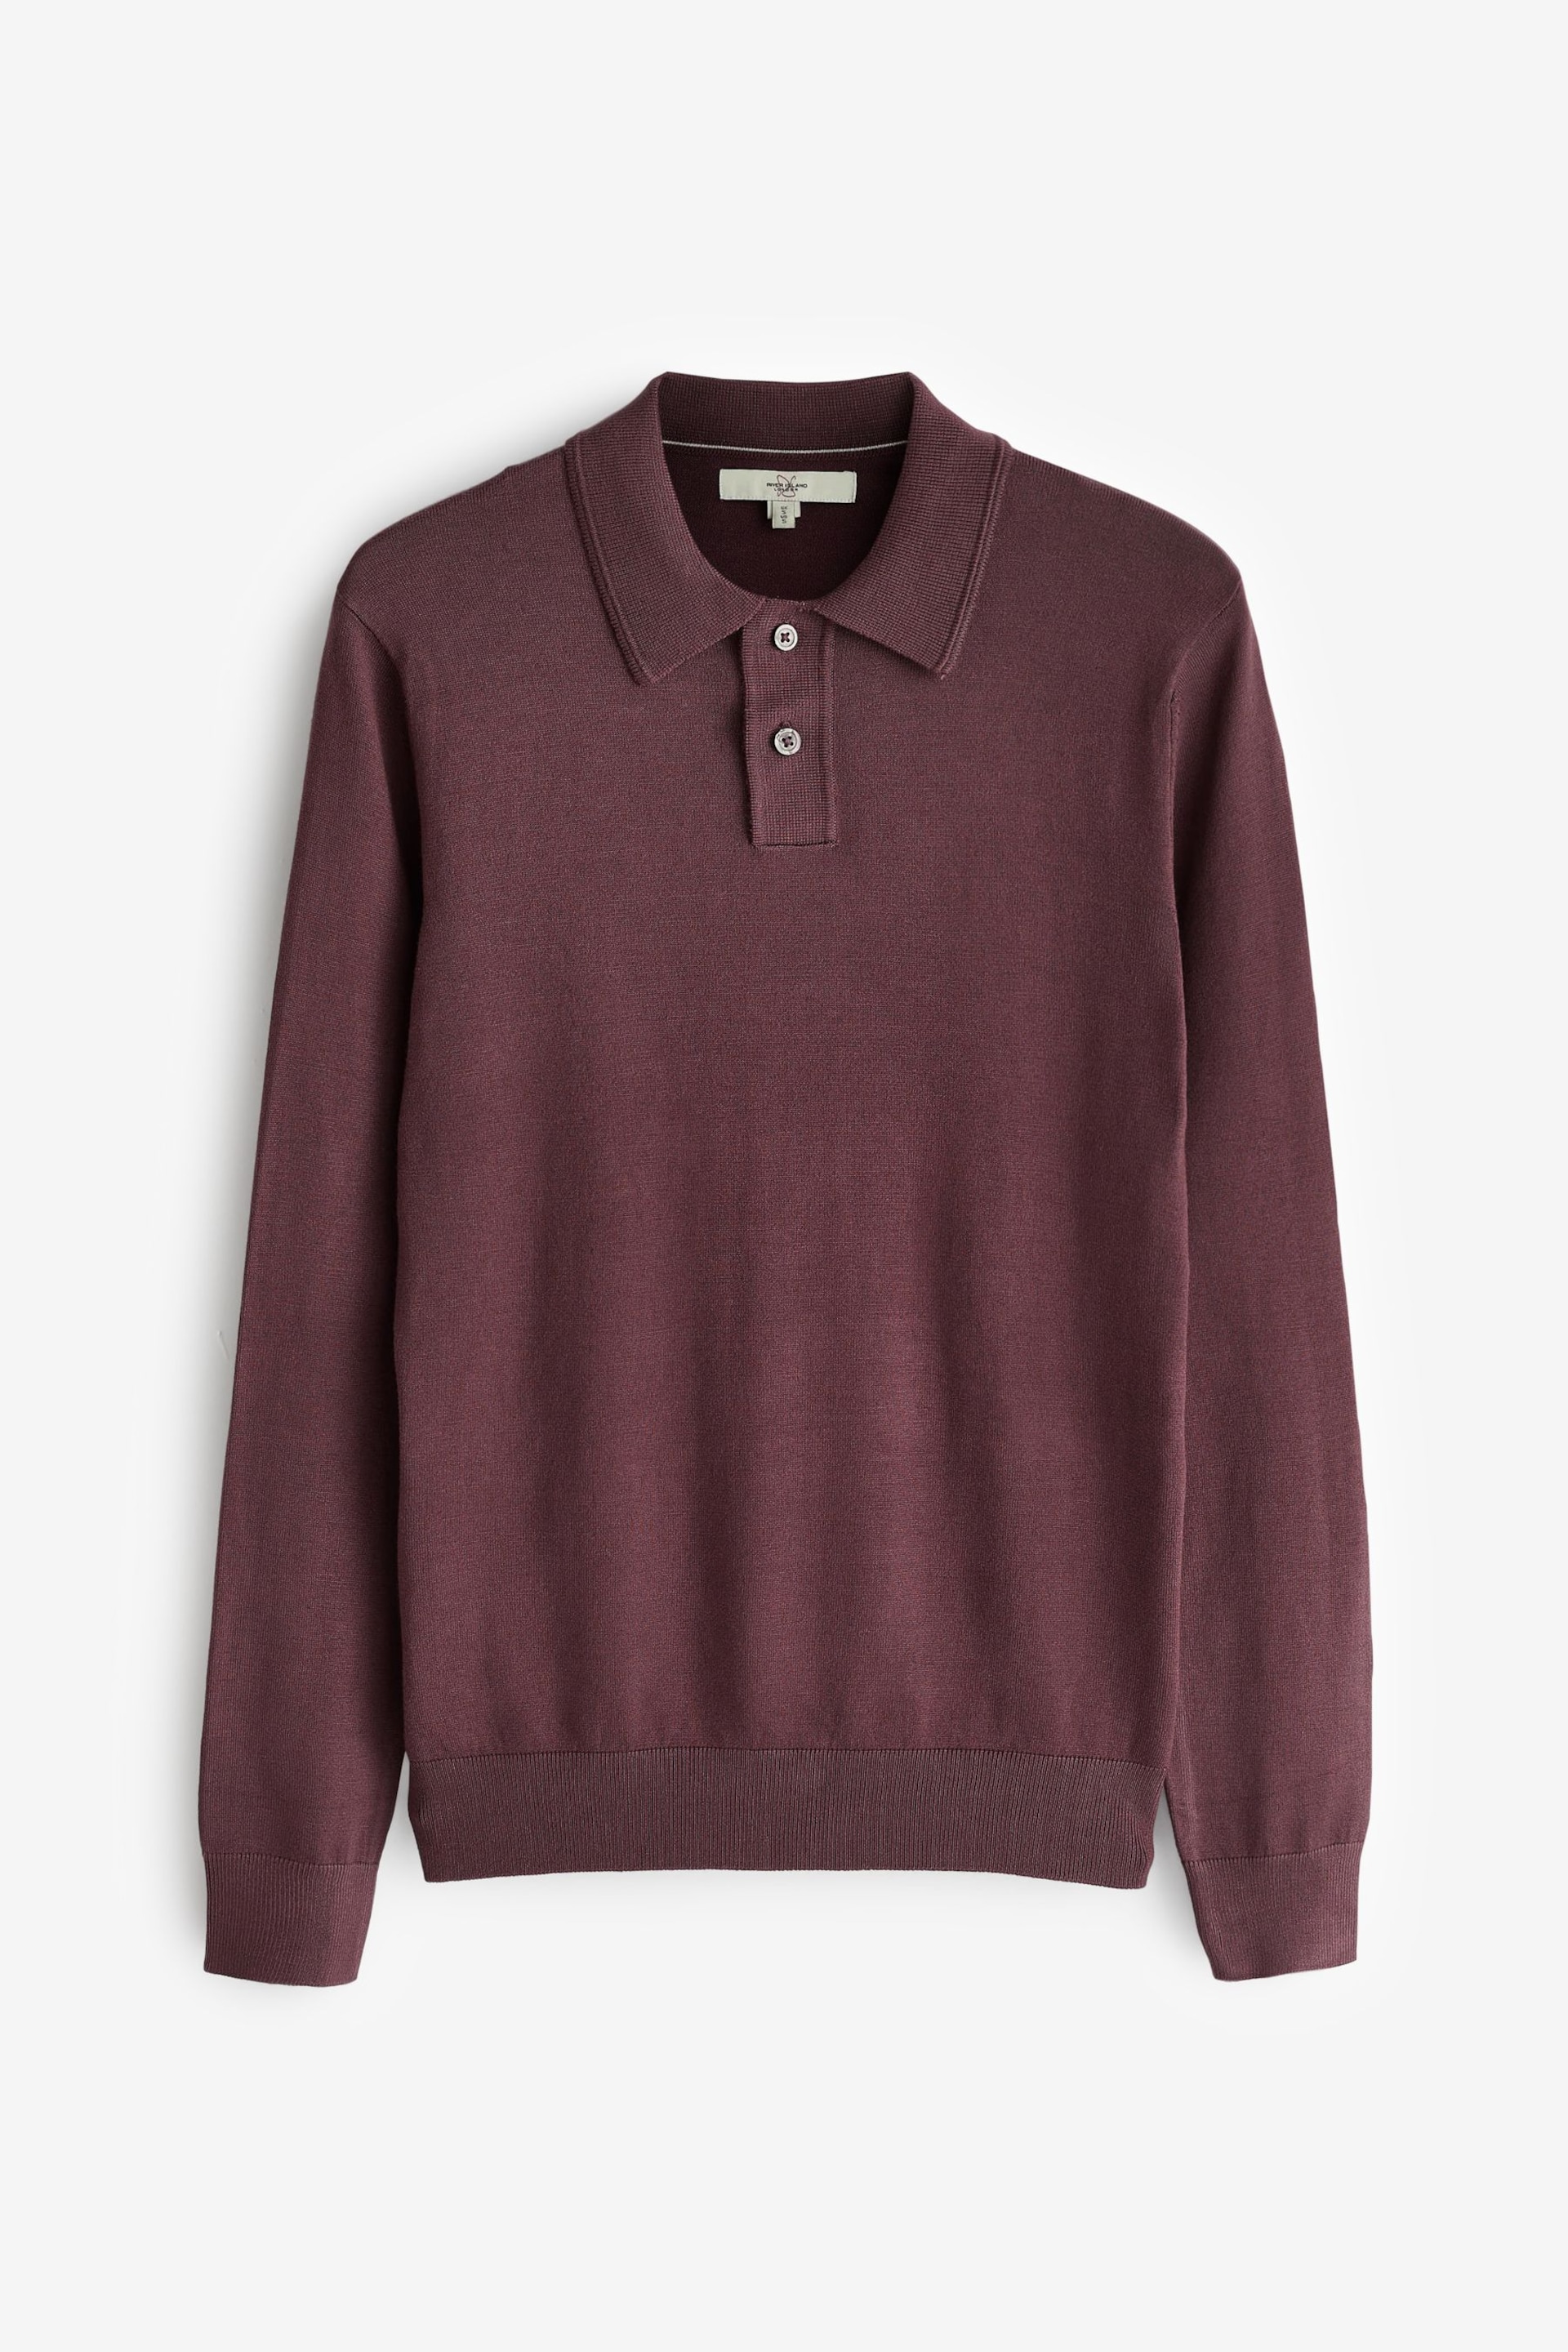 River Island Purple Knitted Polo Jumper - Image 6 of 6